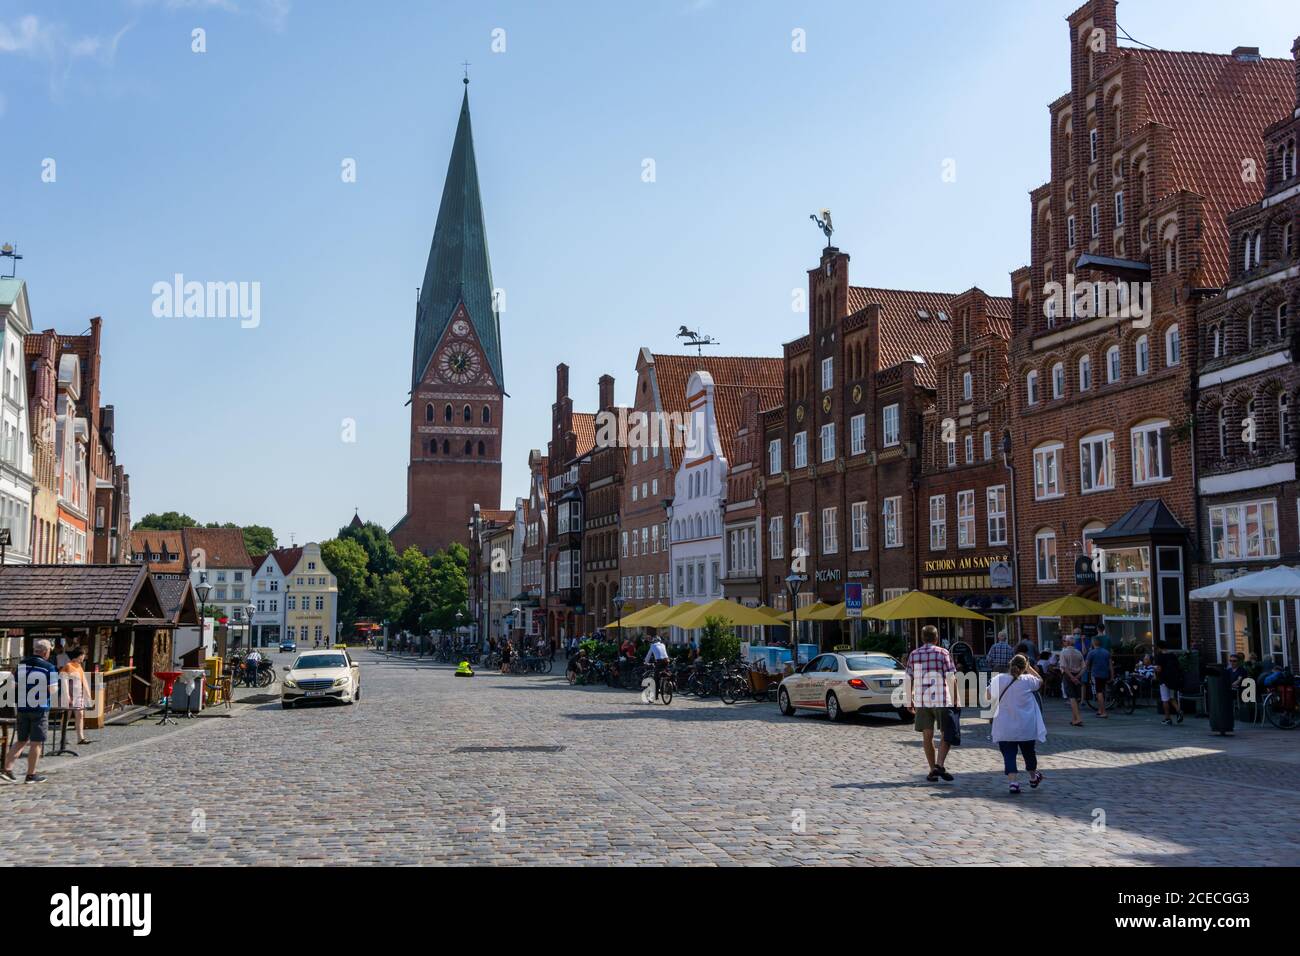 Lunenburg, LS, Germany - 8 August 2020: downtown Lunenburg with the historic city square and church Stock Photo